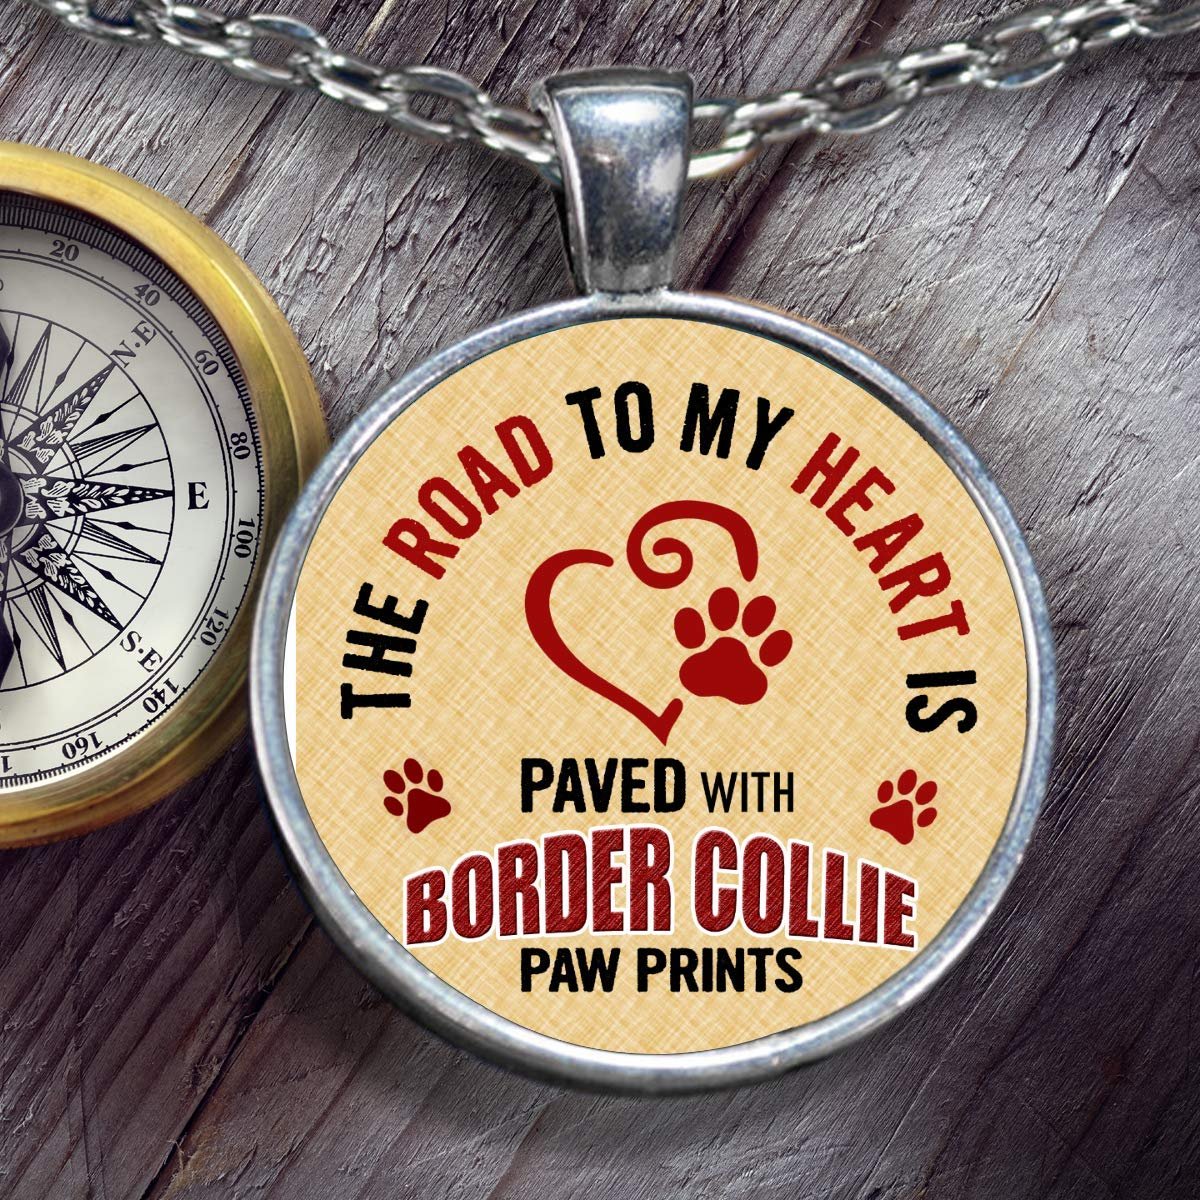 Border Collie Dog Necklace - Border Collie Lover - Dog Lovers Novelty Pendant and Gift – The Road to My Heart is Paved with Border Collie Paw Prints - Border Collie Gifts